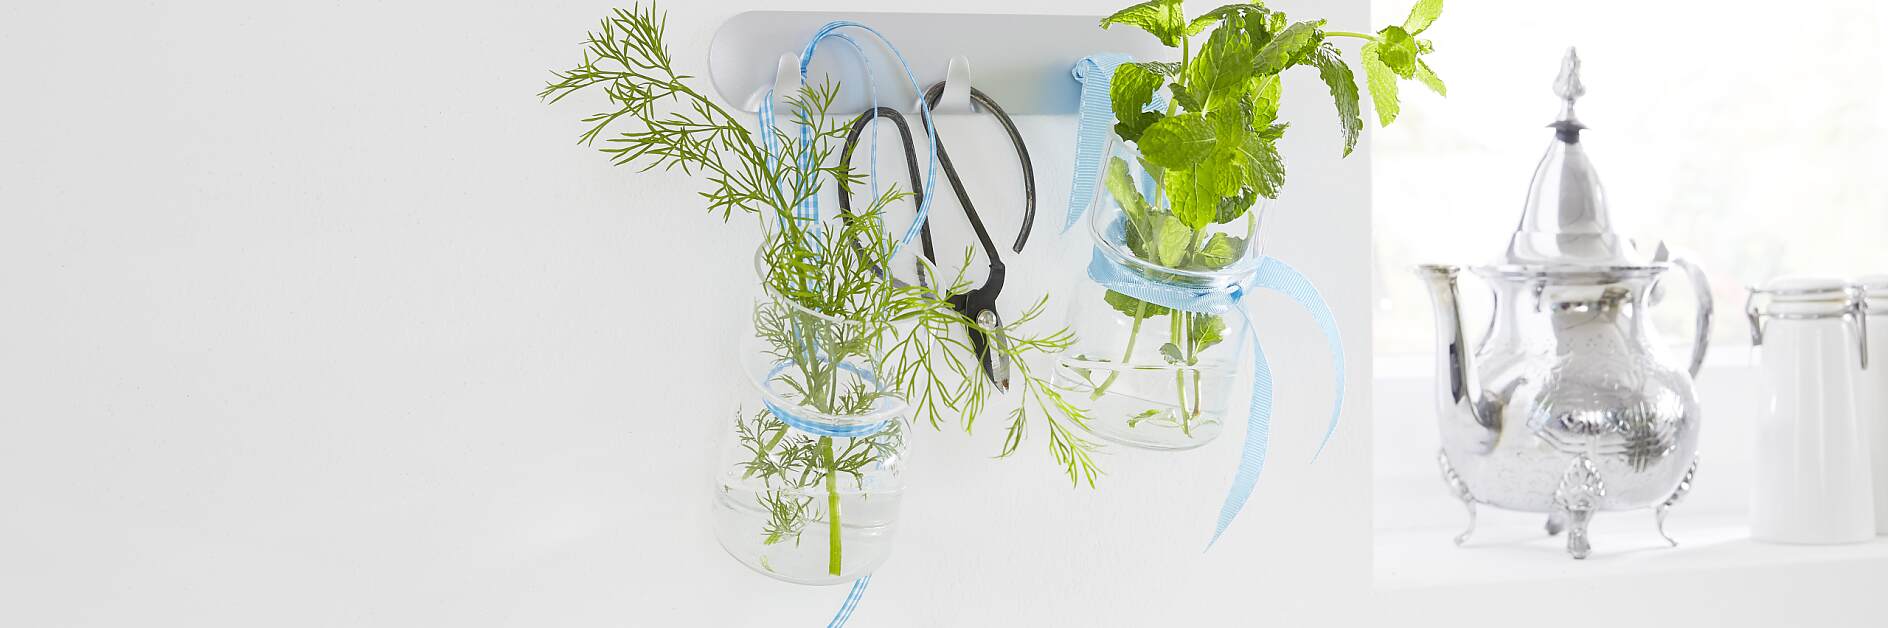 Culinary herbs in glasses